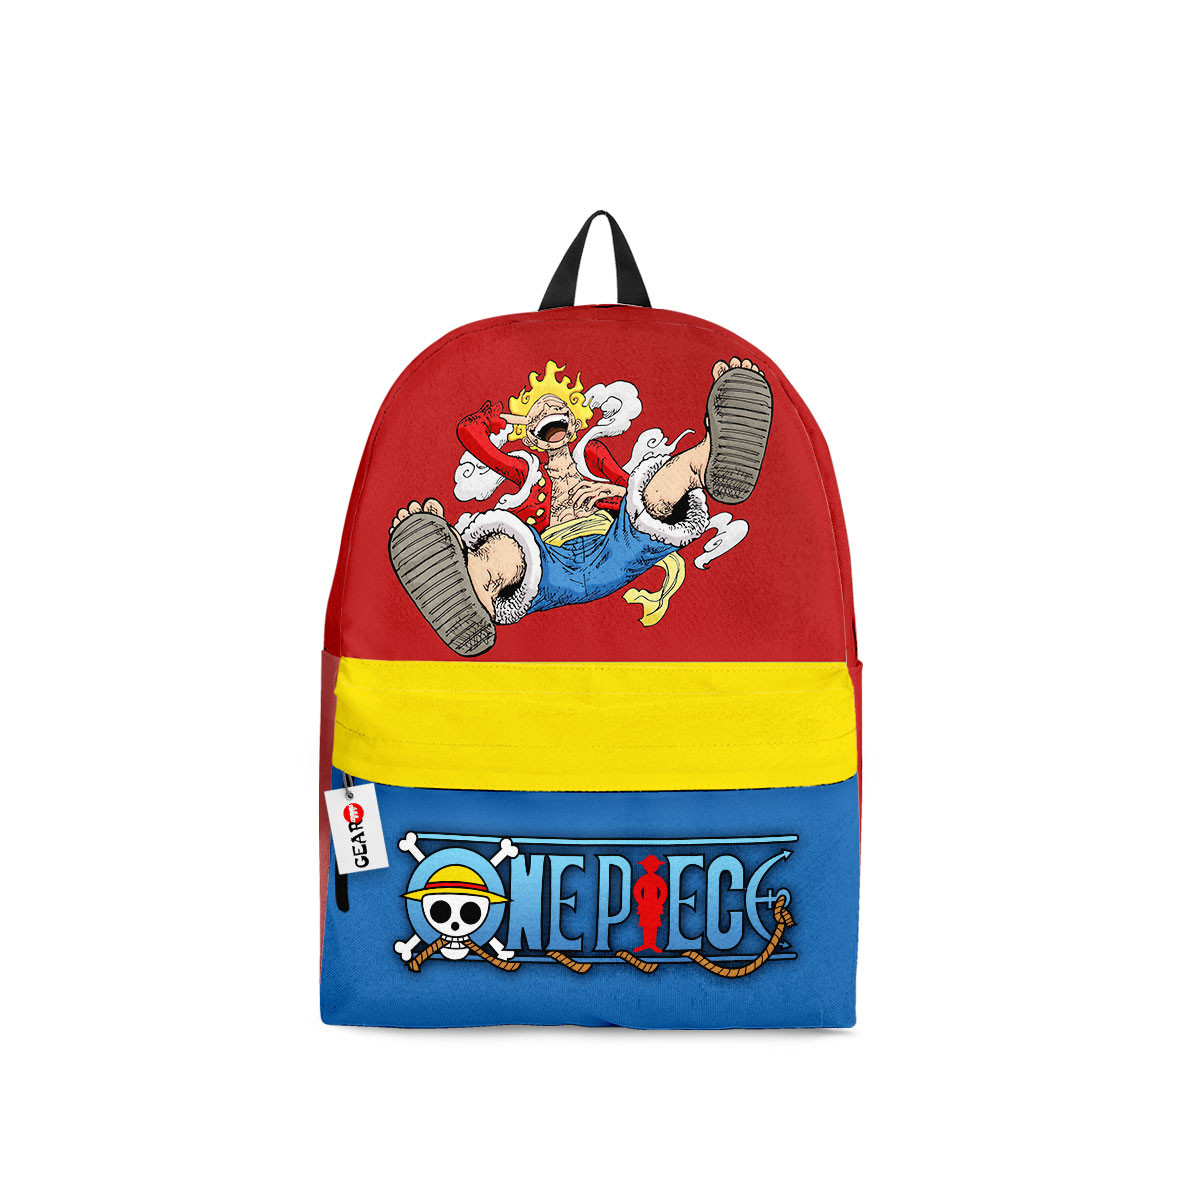 BEST Luffy Gear 5 One Piece Anime Backpack Bag1